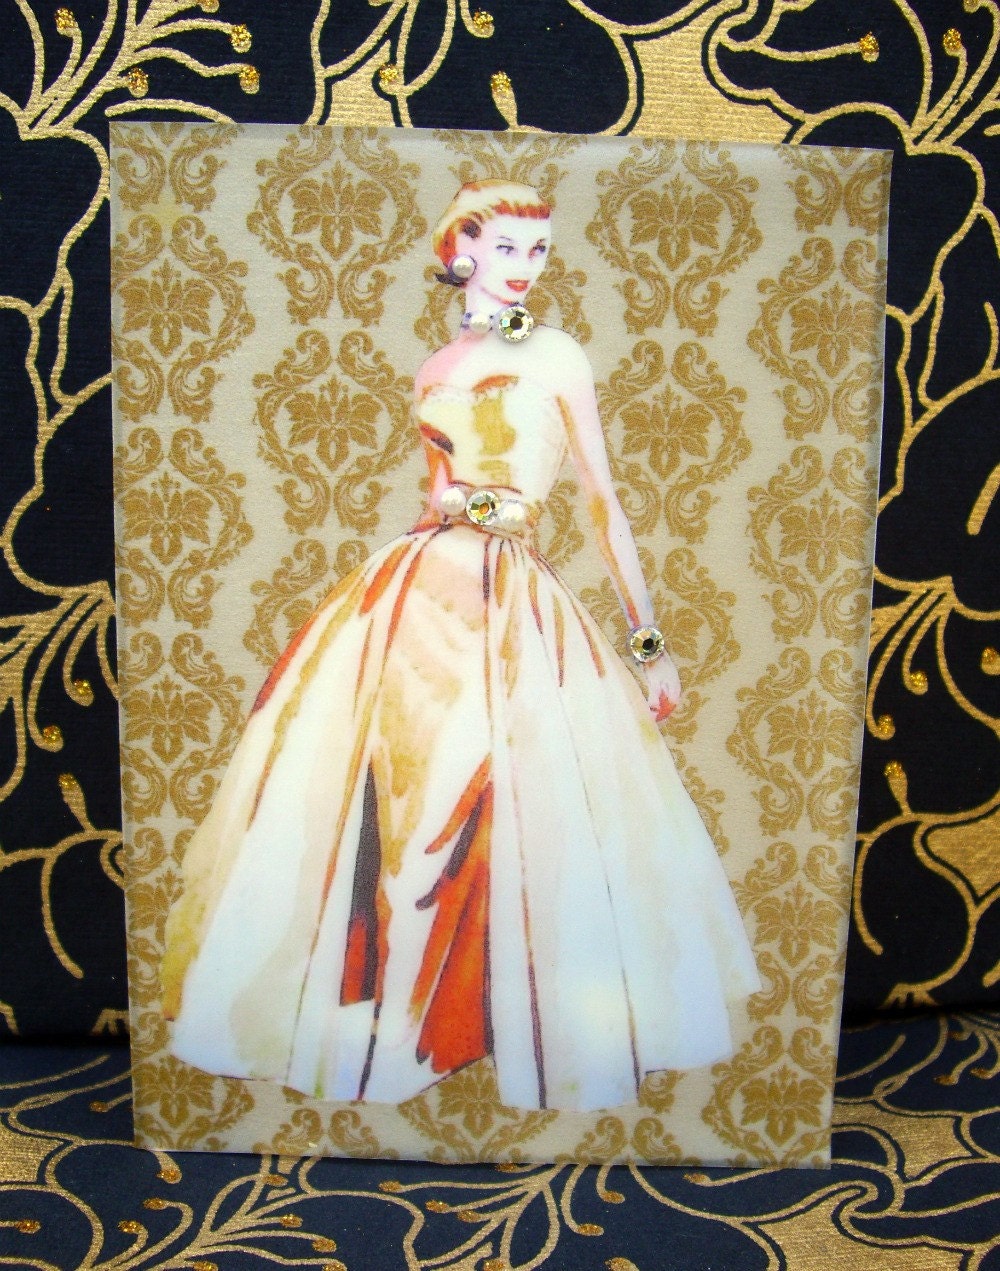 Grace Card / Vintage Printed Collection / 50s Glamour Girl / Handmade Greeting Card